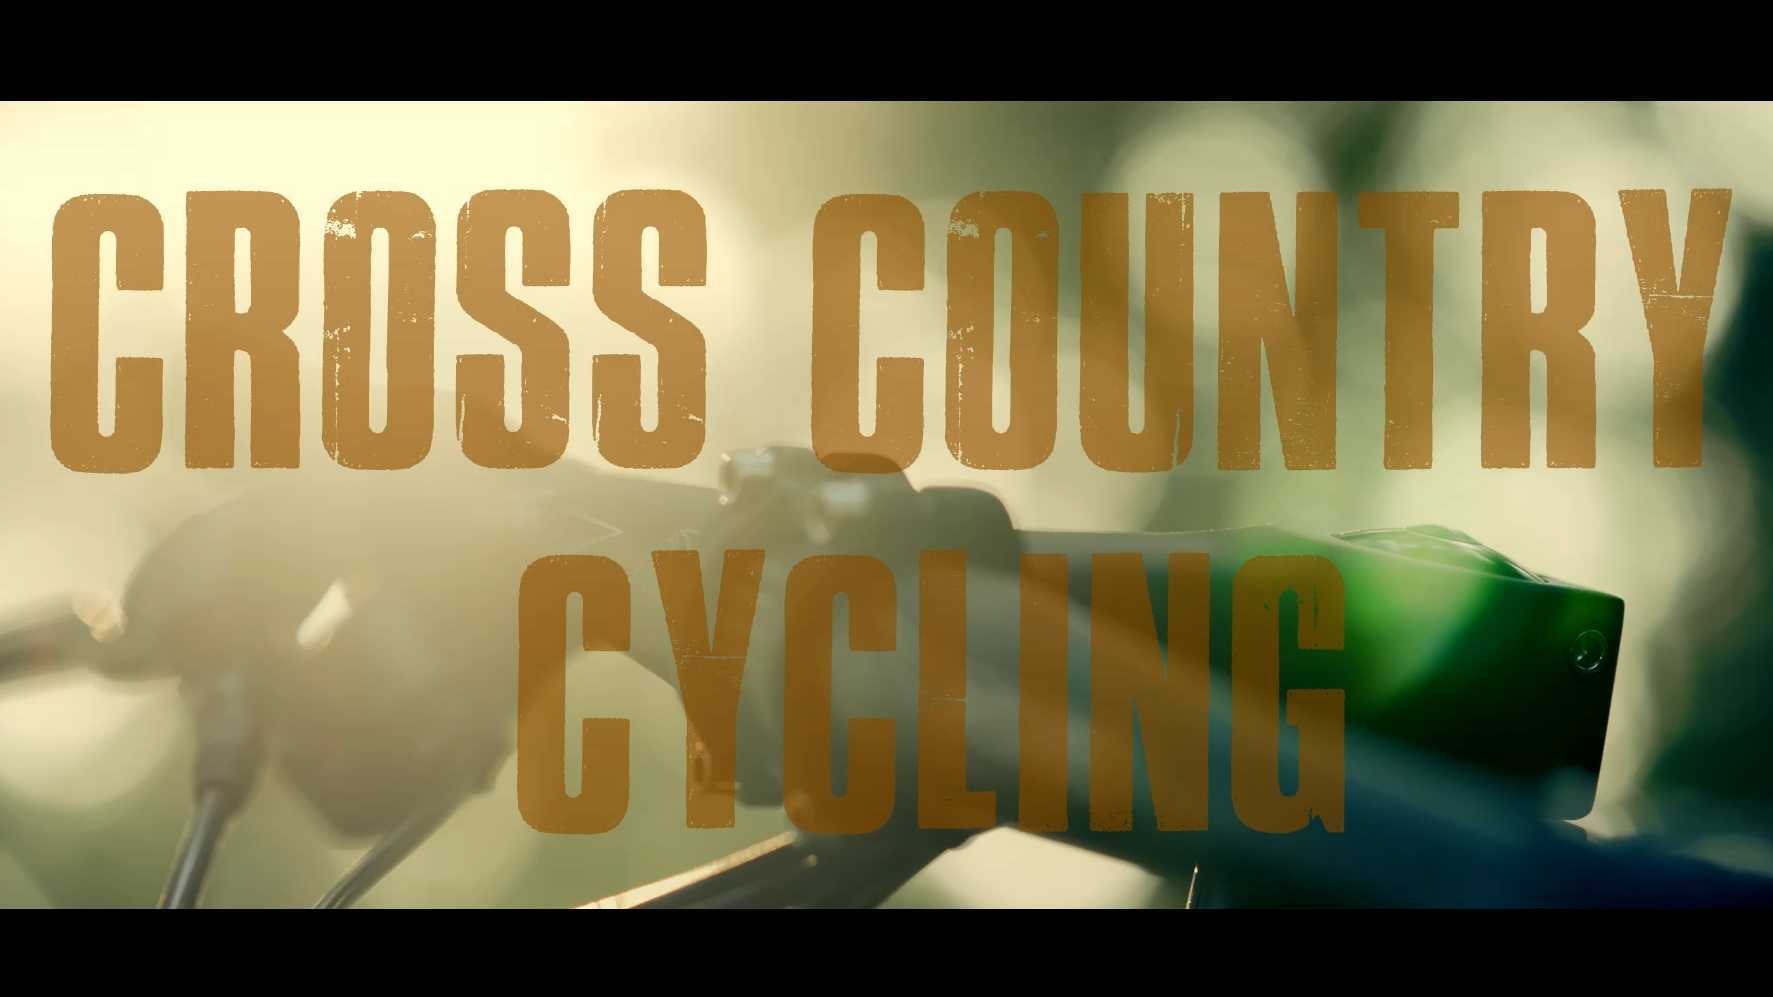 CROSS COUNTRY CYCLING